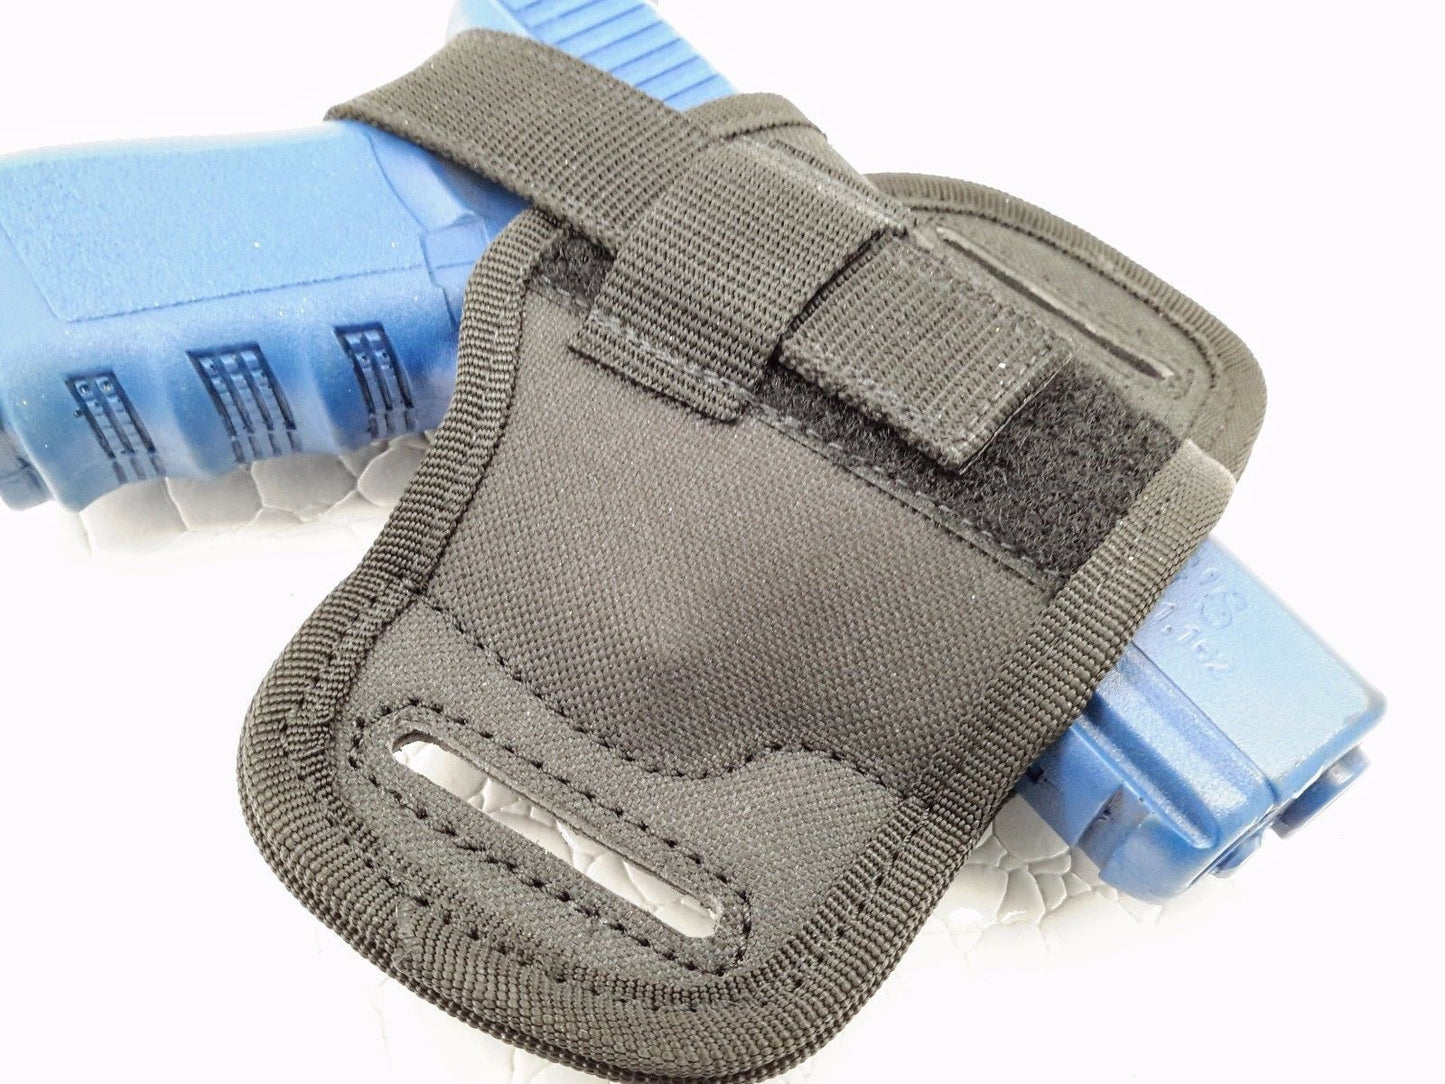 MyHolster (UNIFIT) Universal Fit Holster